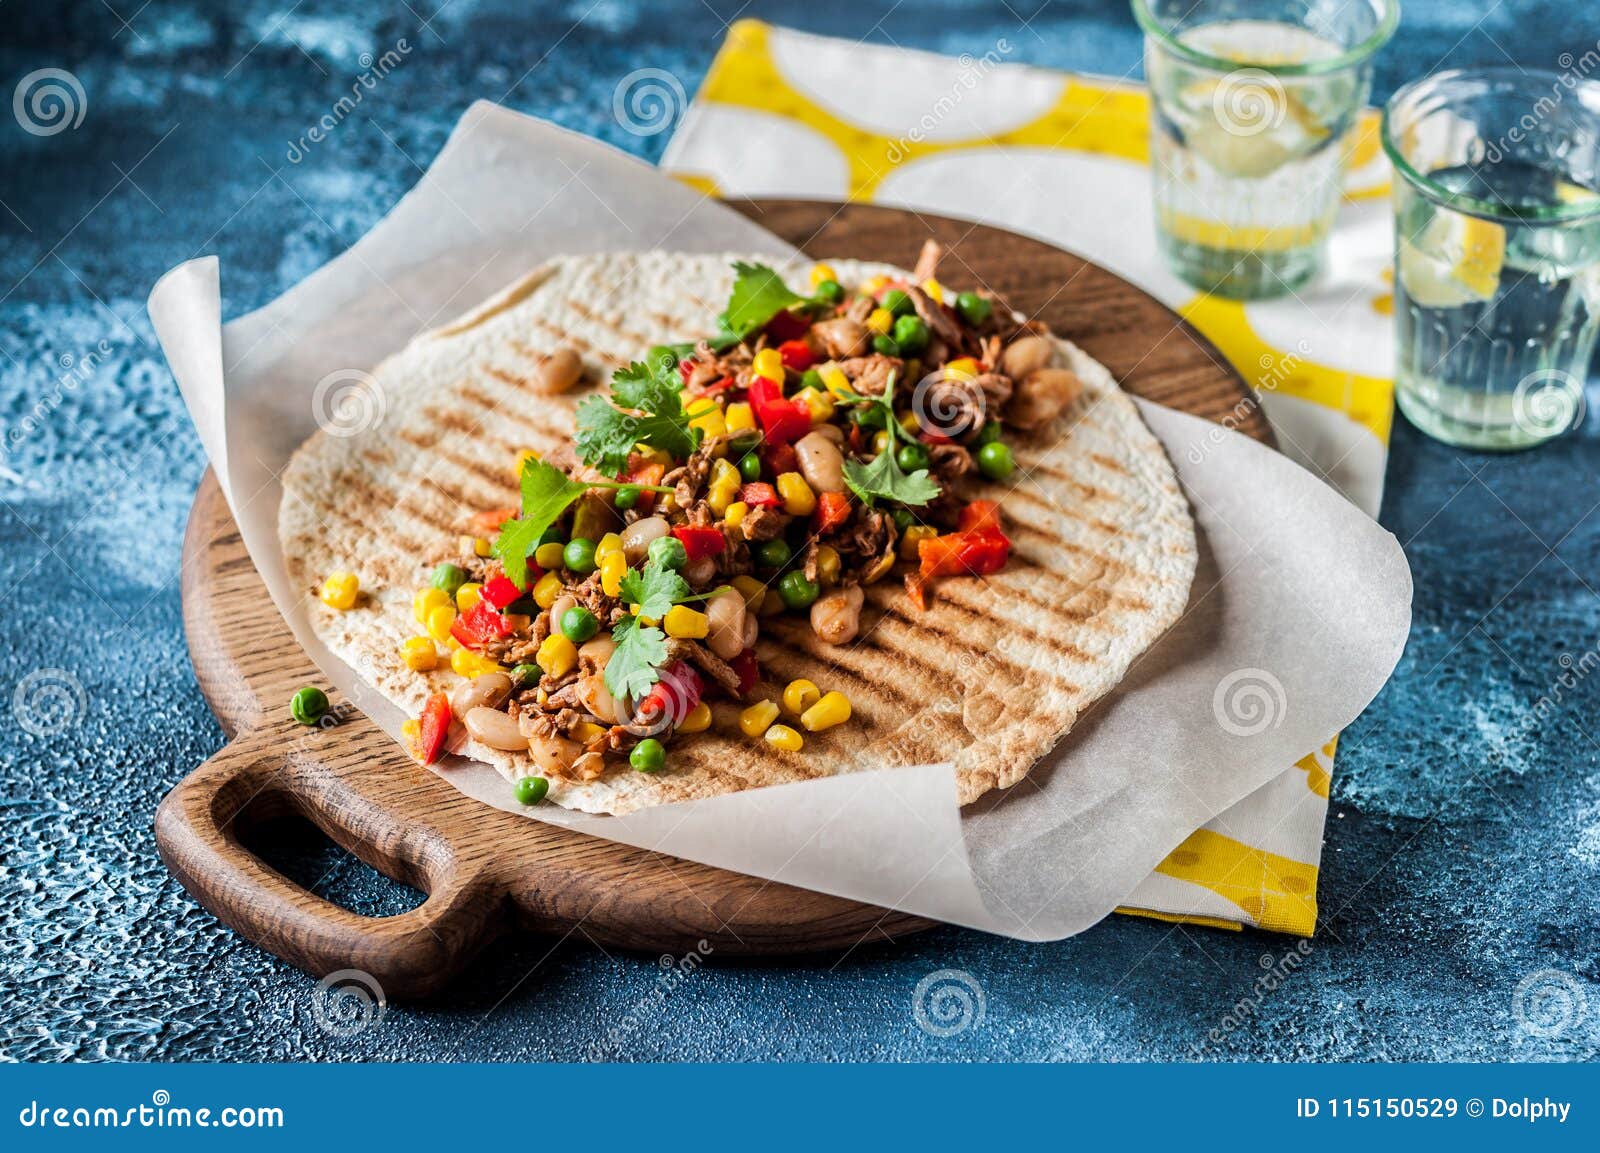 Pulled Pork and Vegetable Tortilla Wraps Stock Image - Image of bell ...